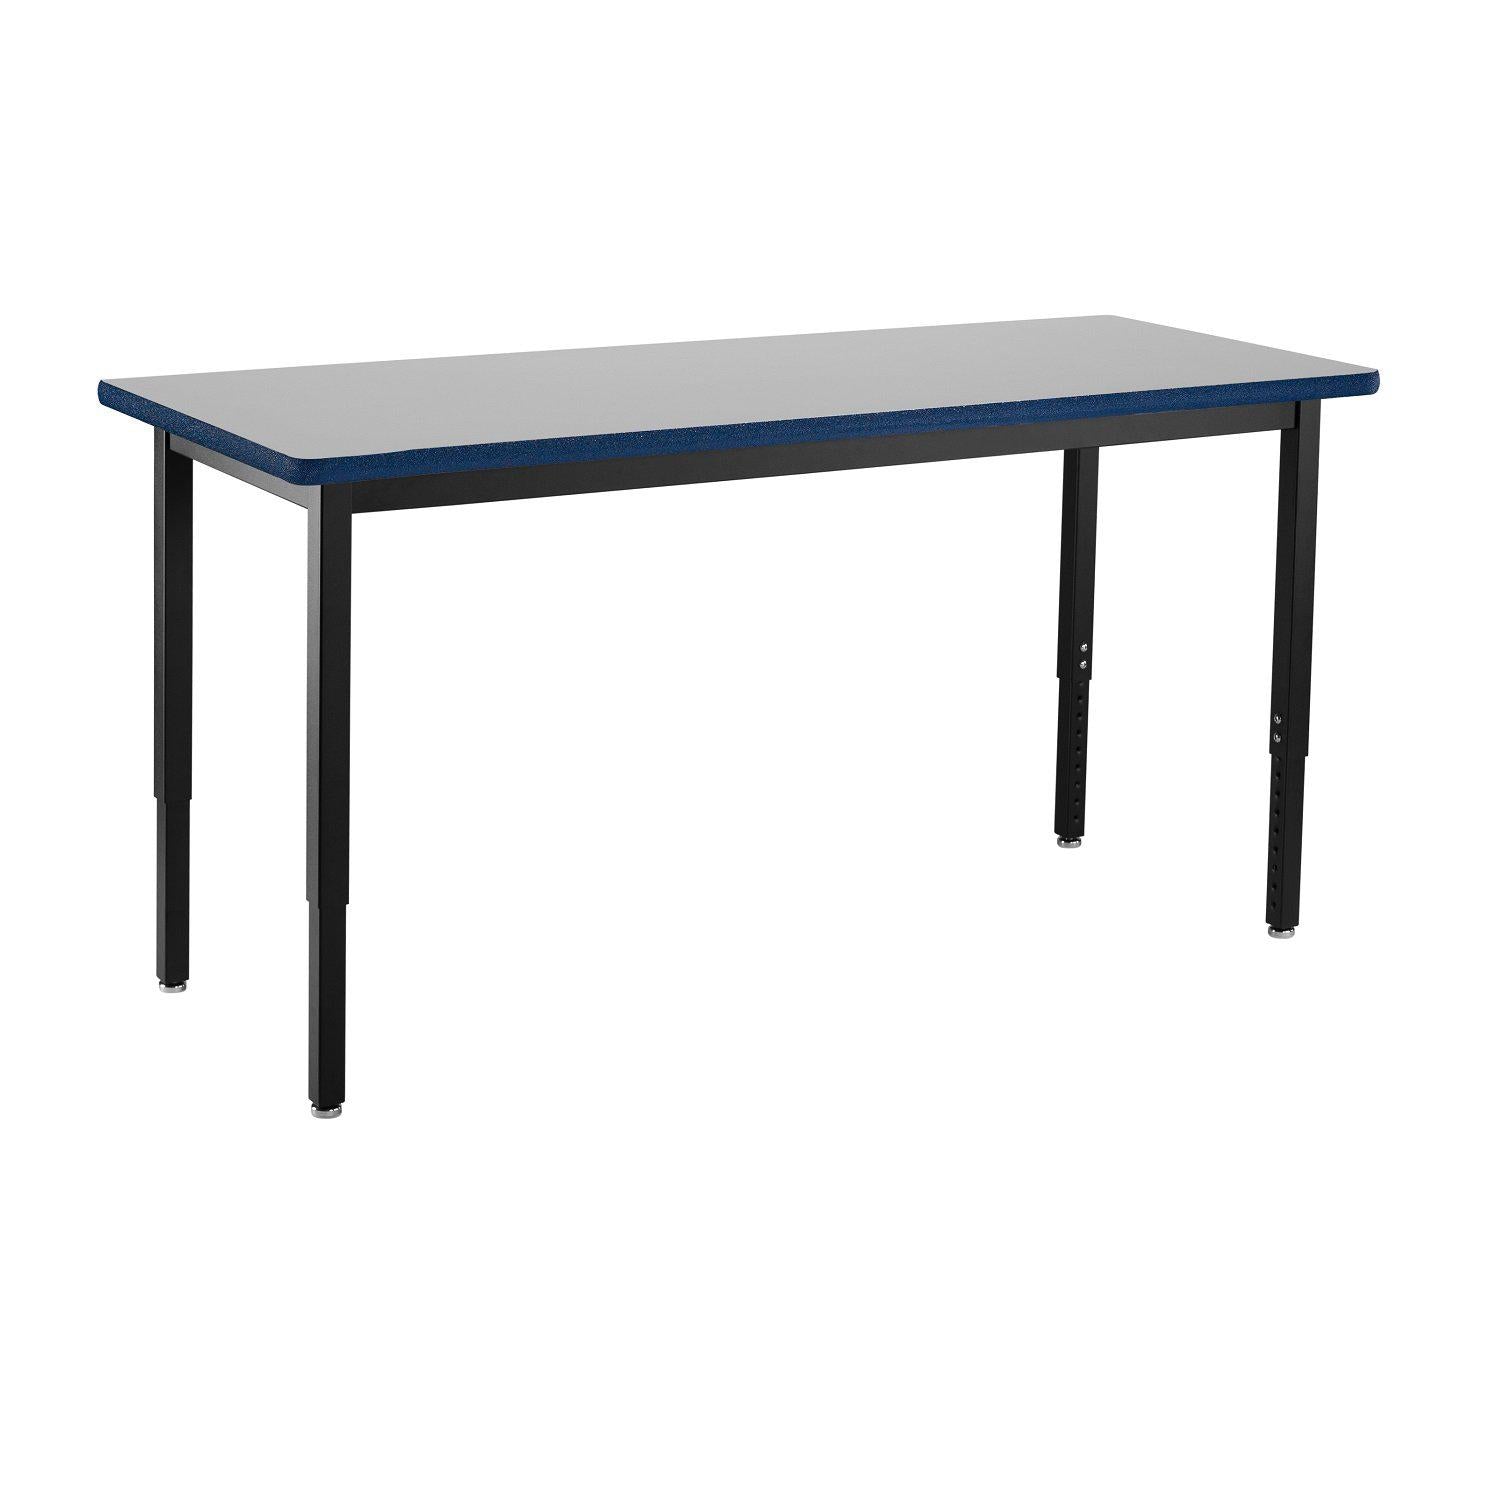 Heavy-Duty Height-Adjustable Utility Table, Black Frame, 30" x 42", Supreme High-Pressure Laminate Top with BlackProtectEdge